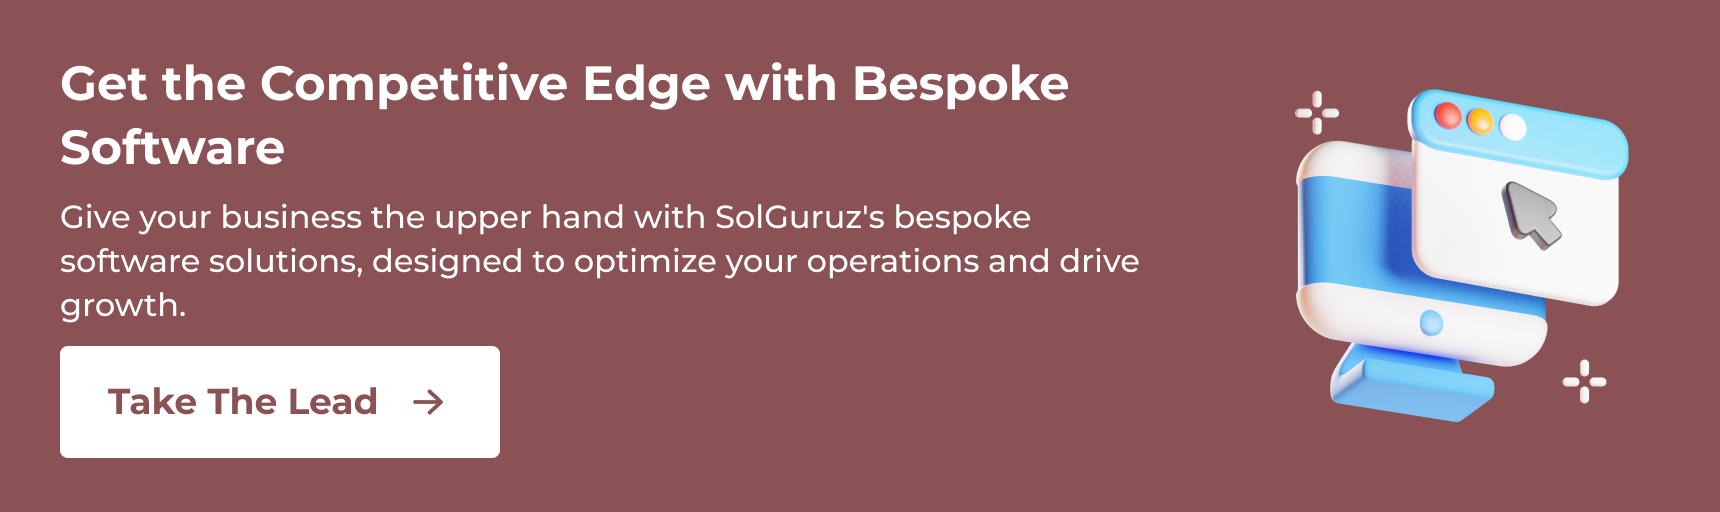 Get the Competitive Edge with Bespoke Software